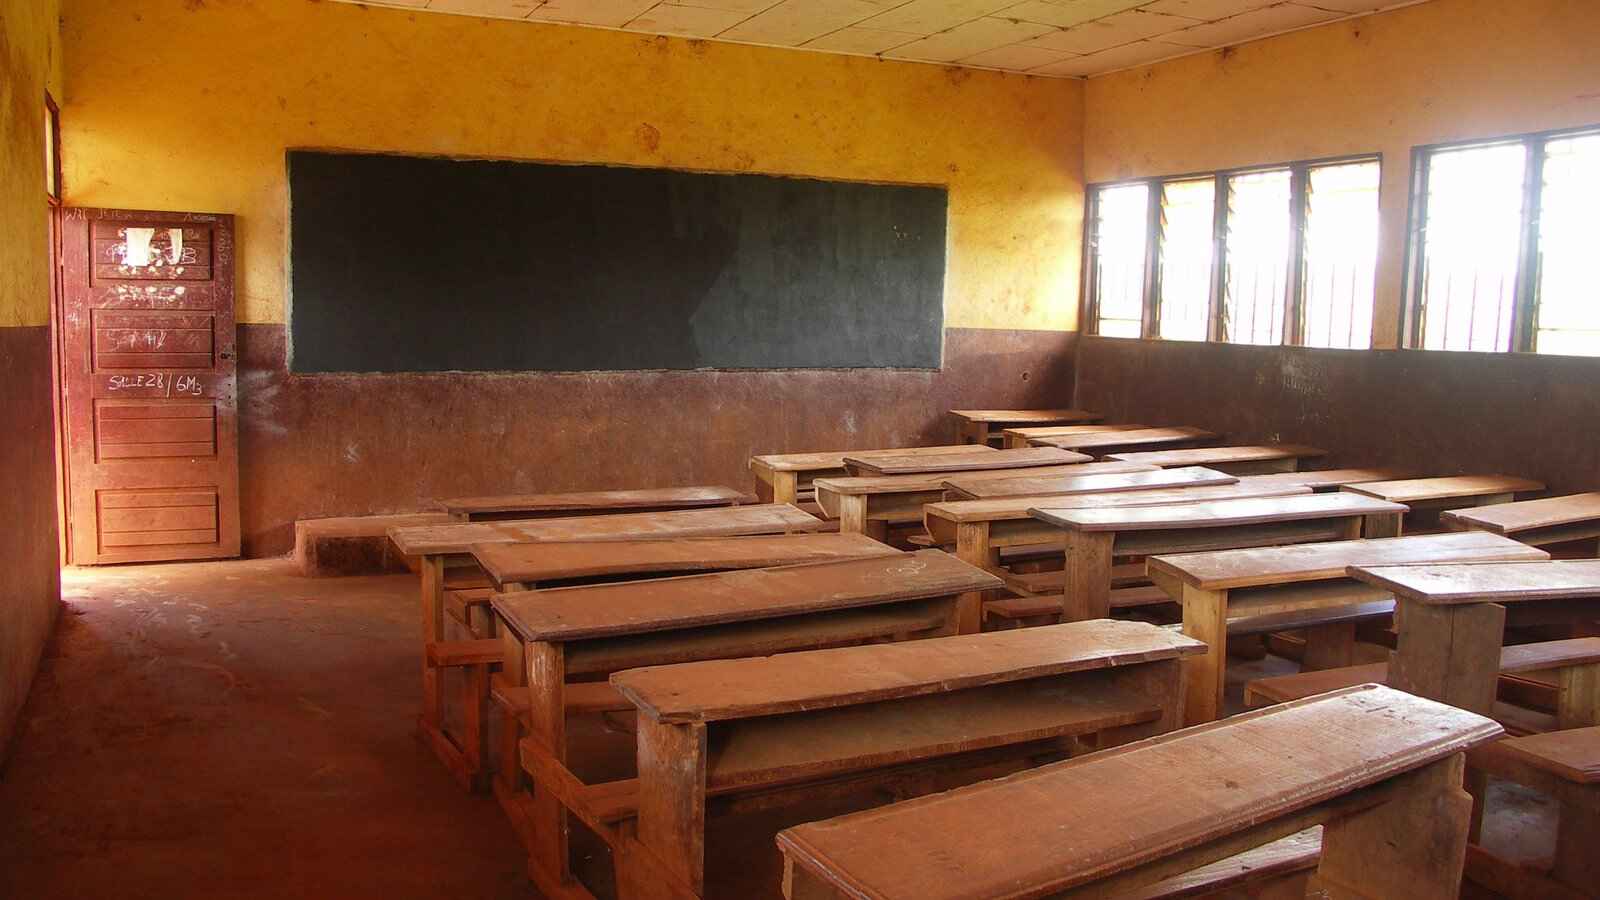 Schools closed down in the northern region